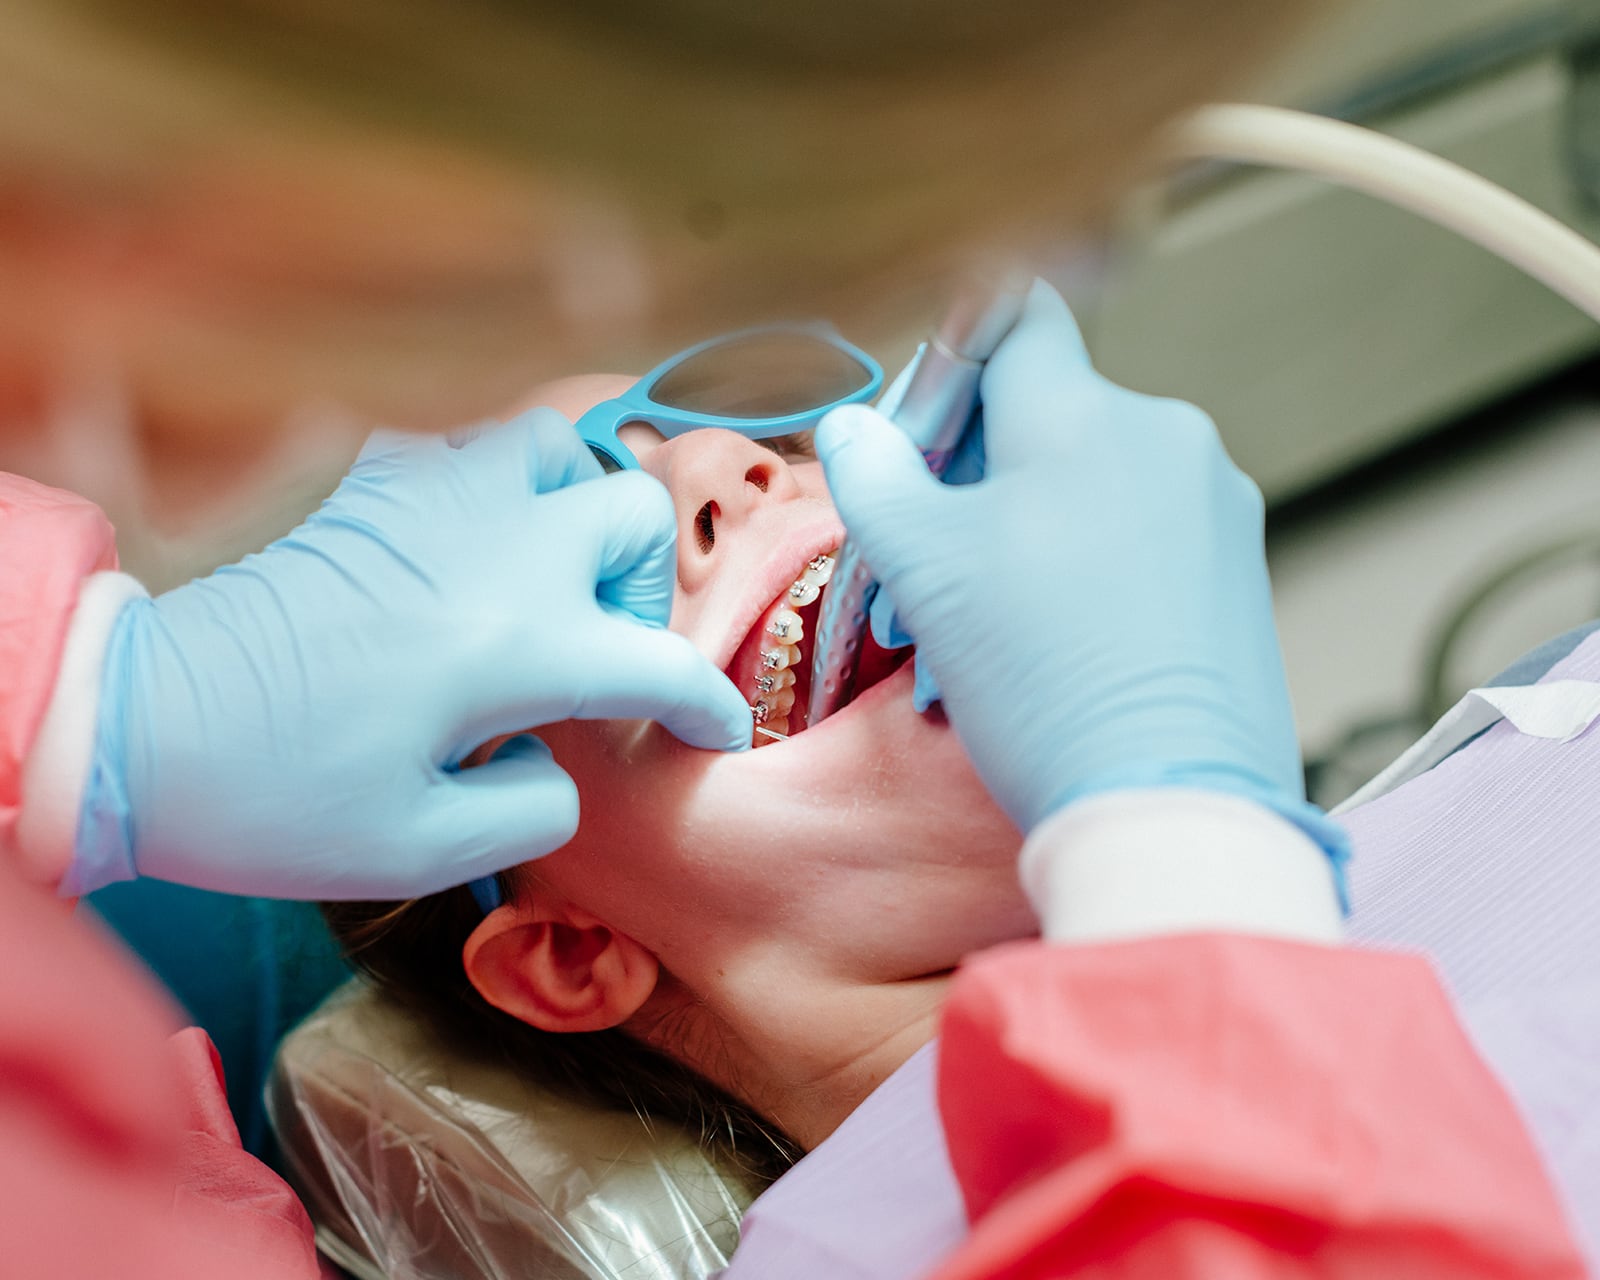 Dentist examining the mouth of a girl with braces.